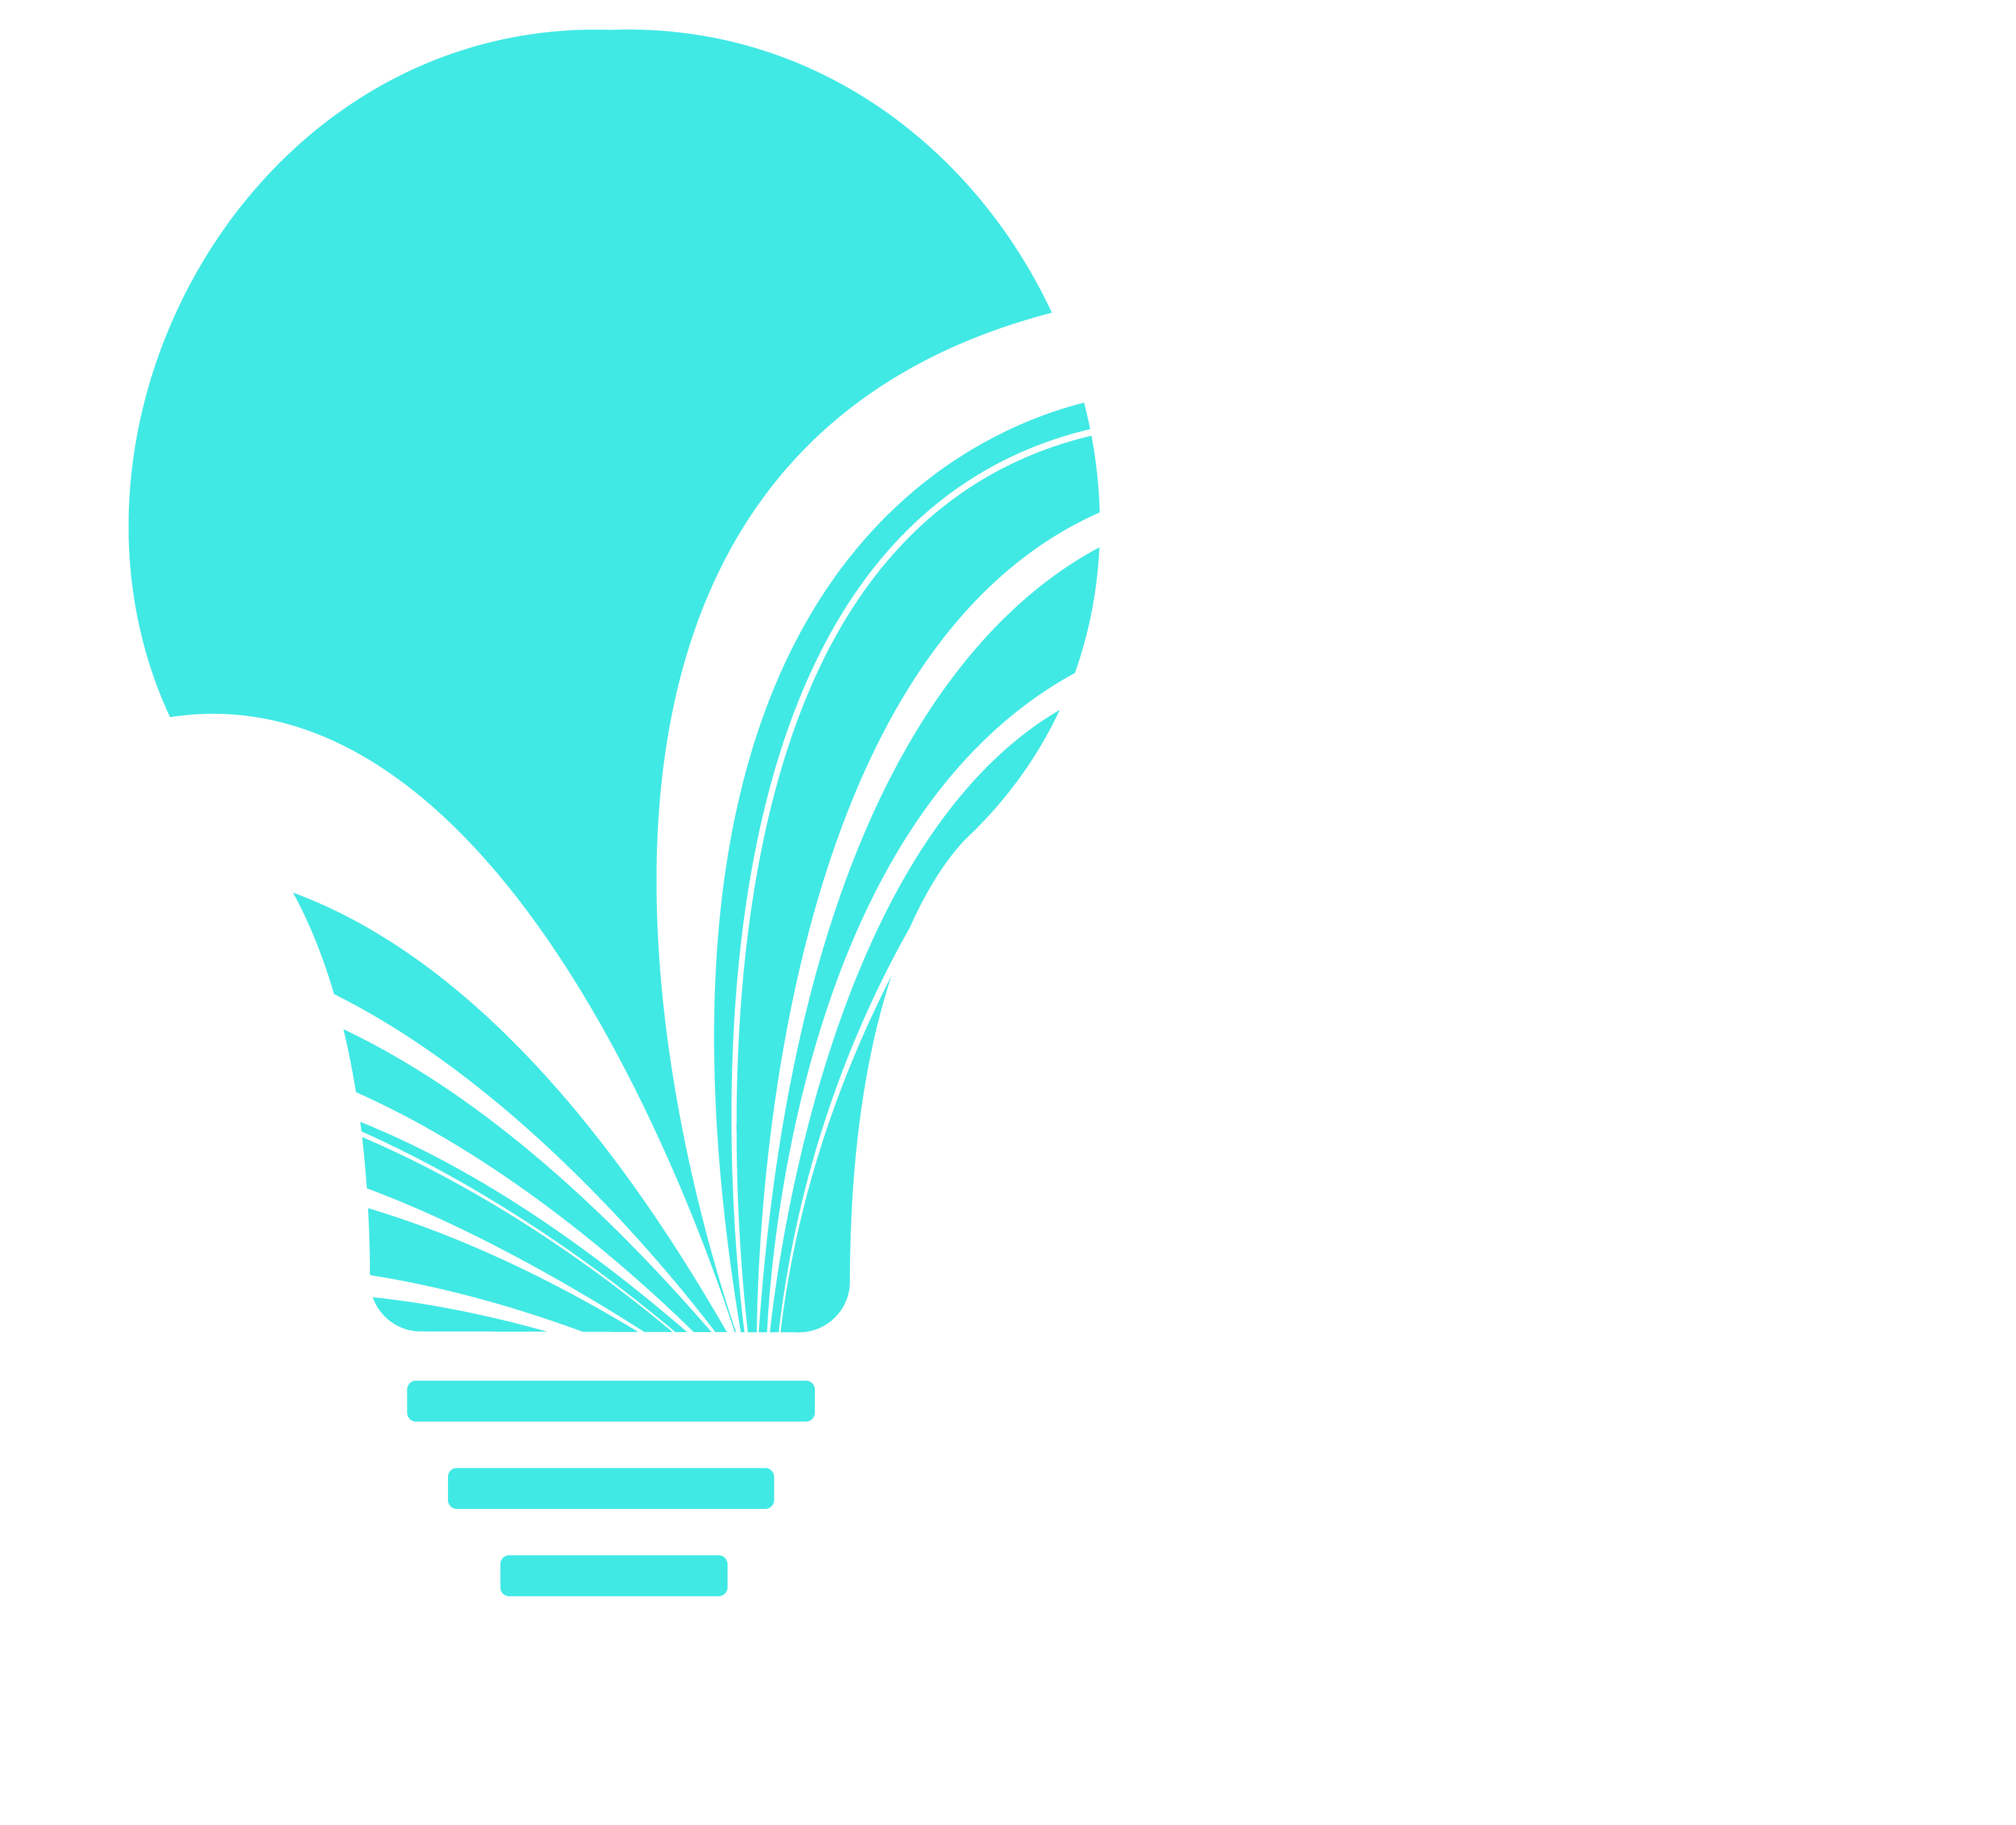 Rampart Library District